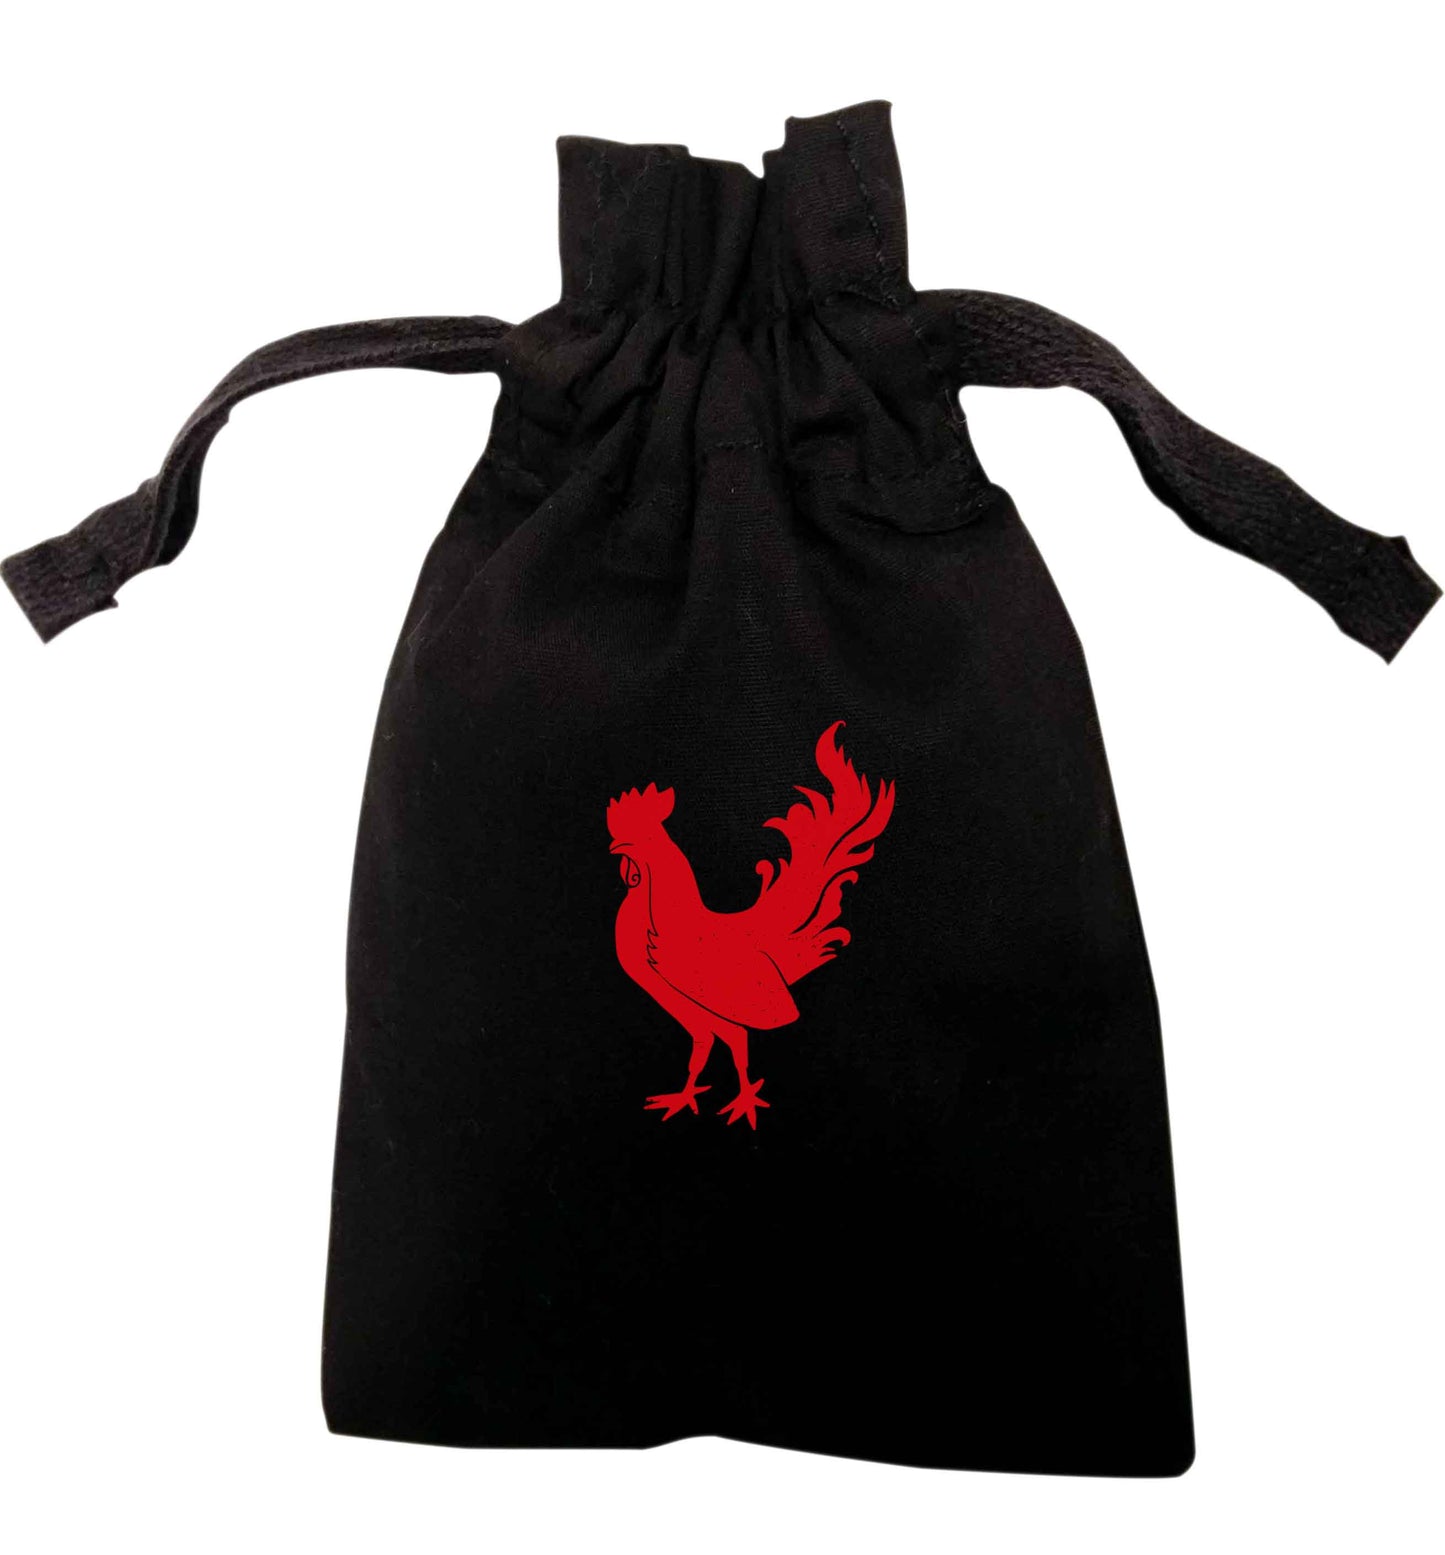 Rooster | XS - L | Pouch / Drawstring bag / Sack | Organic Cotton | Bulk discounts available!